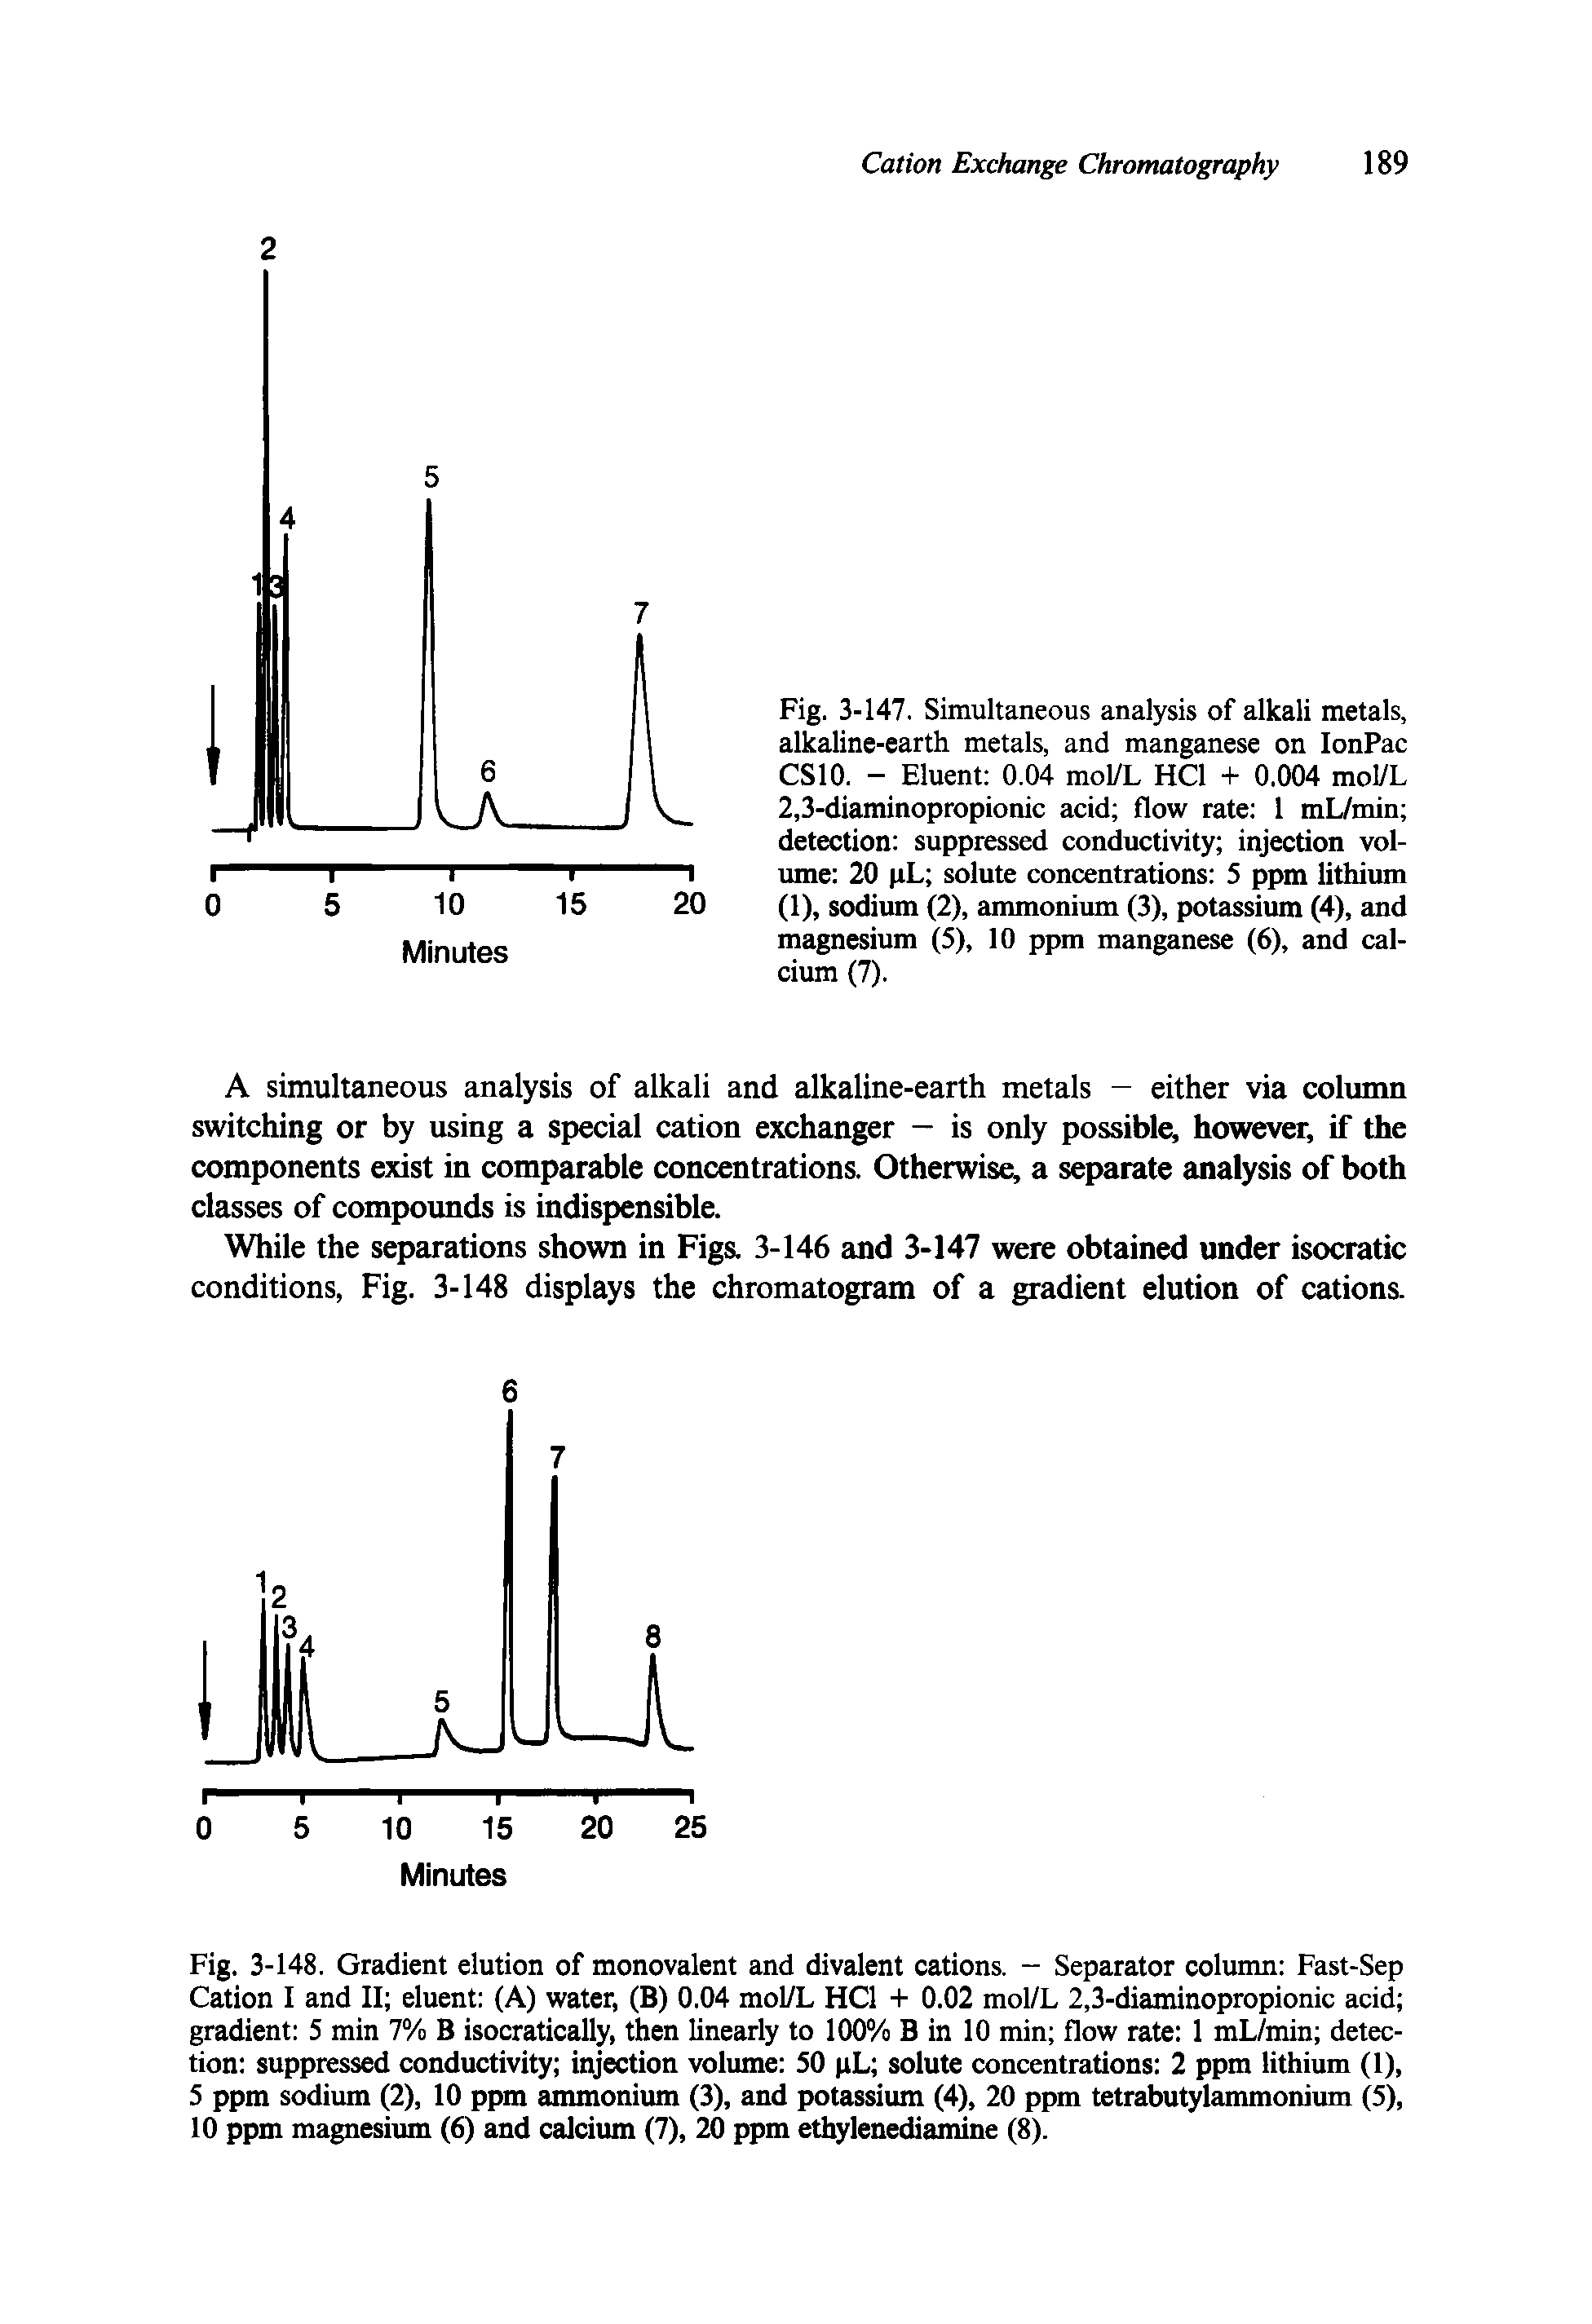 Fig. 3-147. Simultaneous analysis of alkali metals, alkaline-earth metals, and manganese on IonPac CS10. - Eluent 0.04 mol/L HC1 + 0.004 mol/L 2,3-diaminopropionic acid flow rate 1 mL/min detection suppressed conductivity injection volume 20 pL solute concentrations 5 ppm lithium (1), sodium (2), ammonium (3), potassium (4), and magnesium (5), 10 ppm manganese (6), and calcium (7).